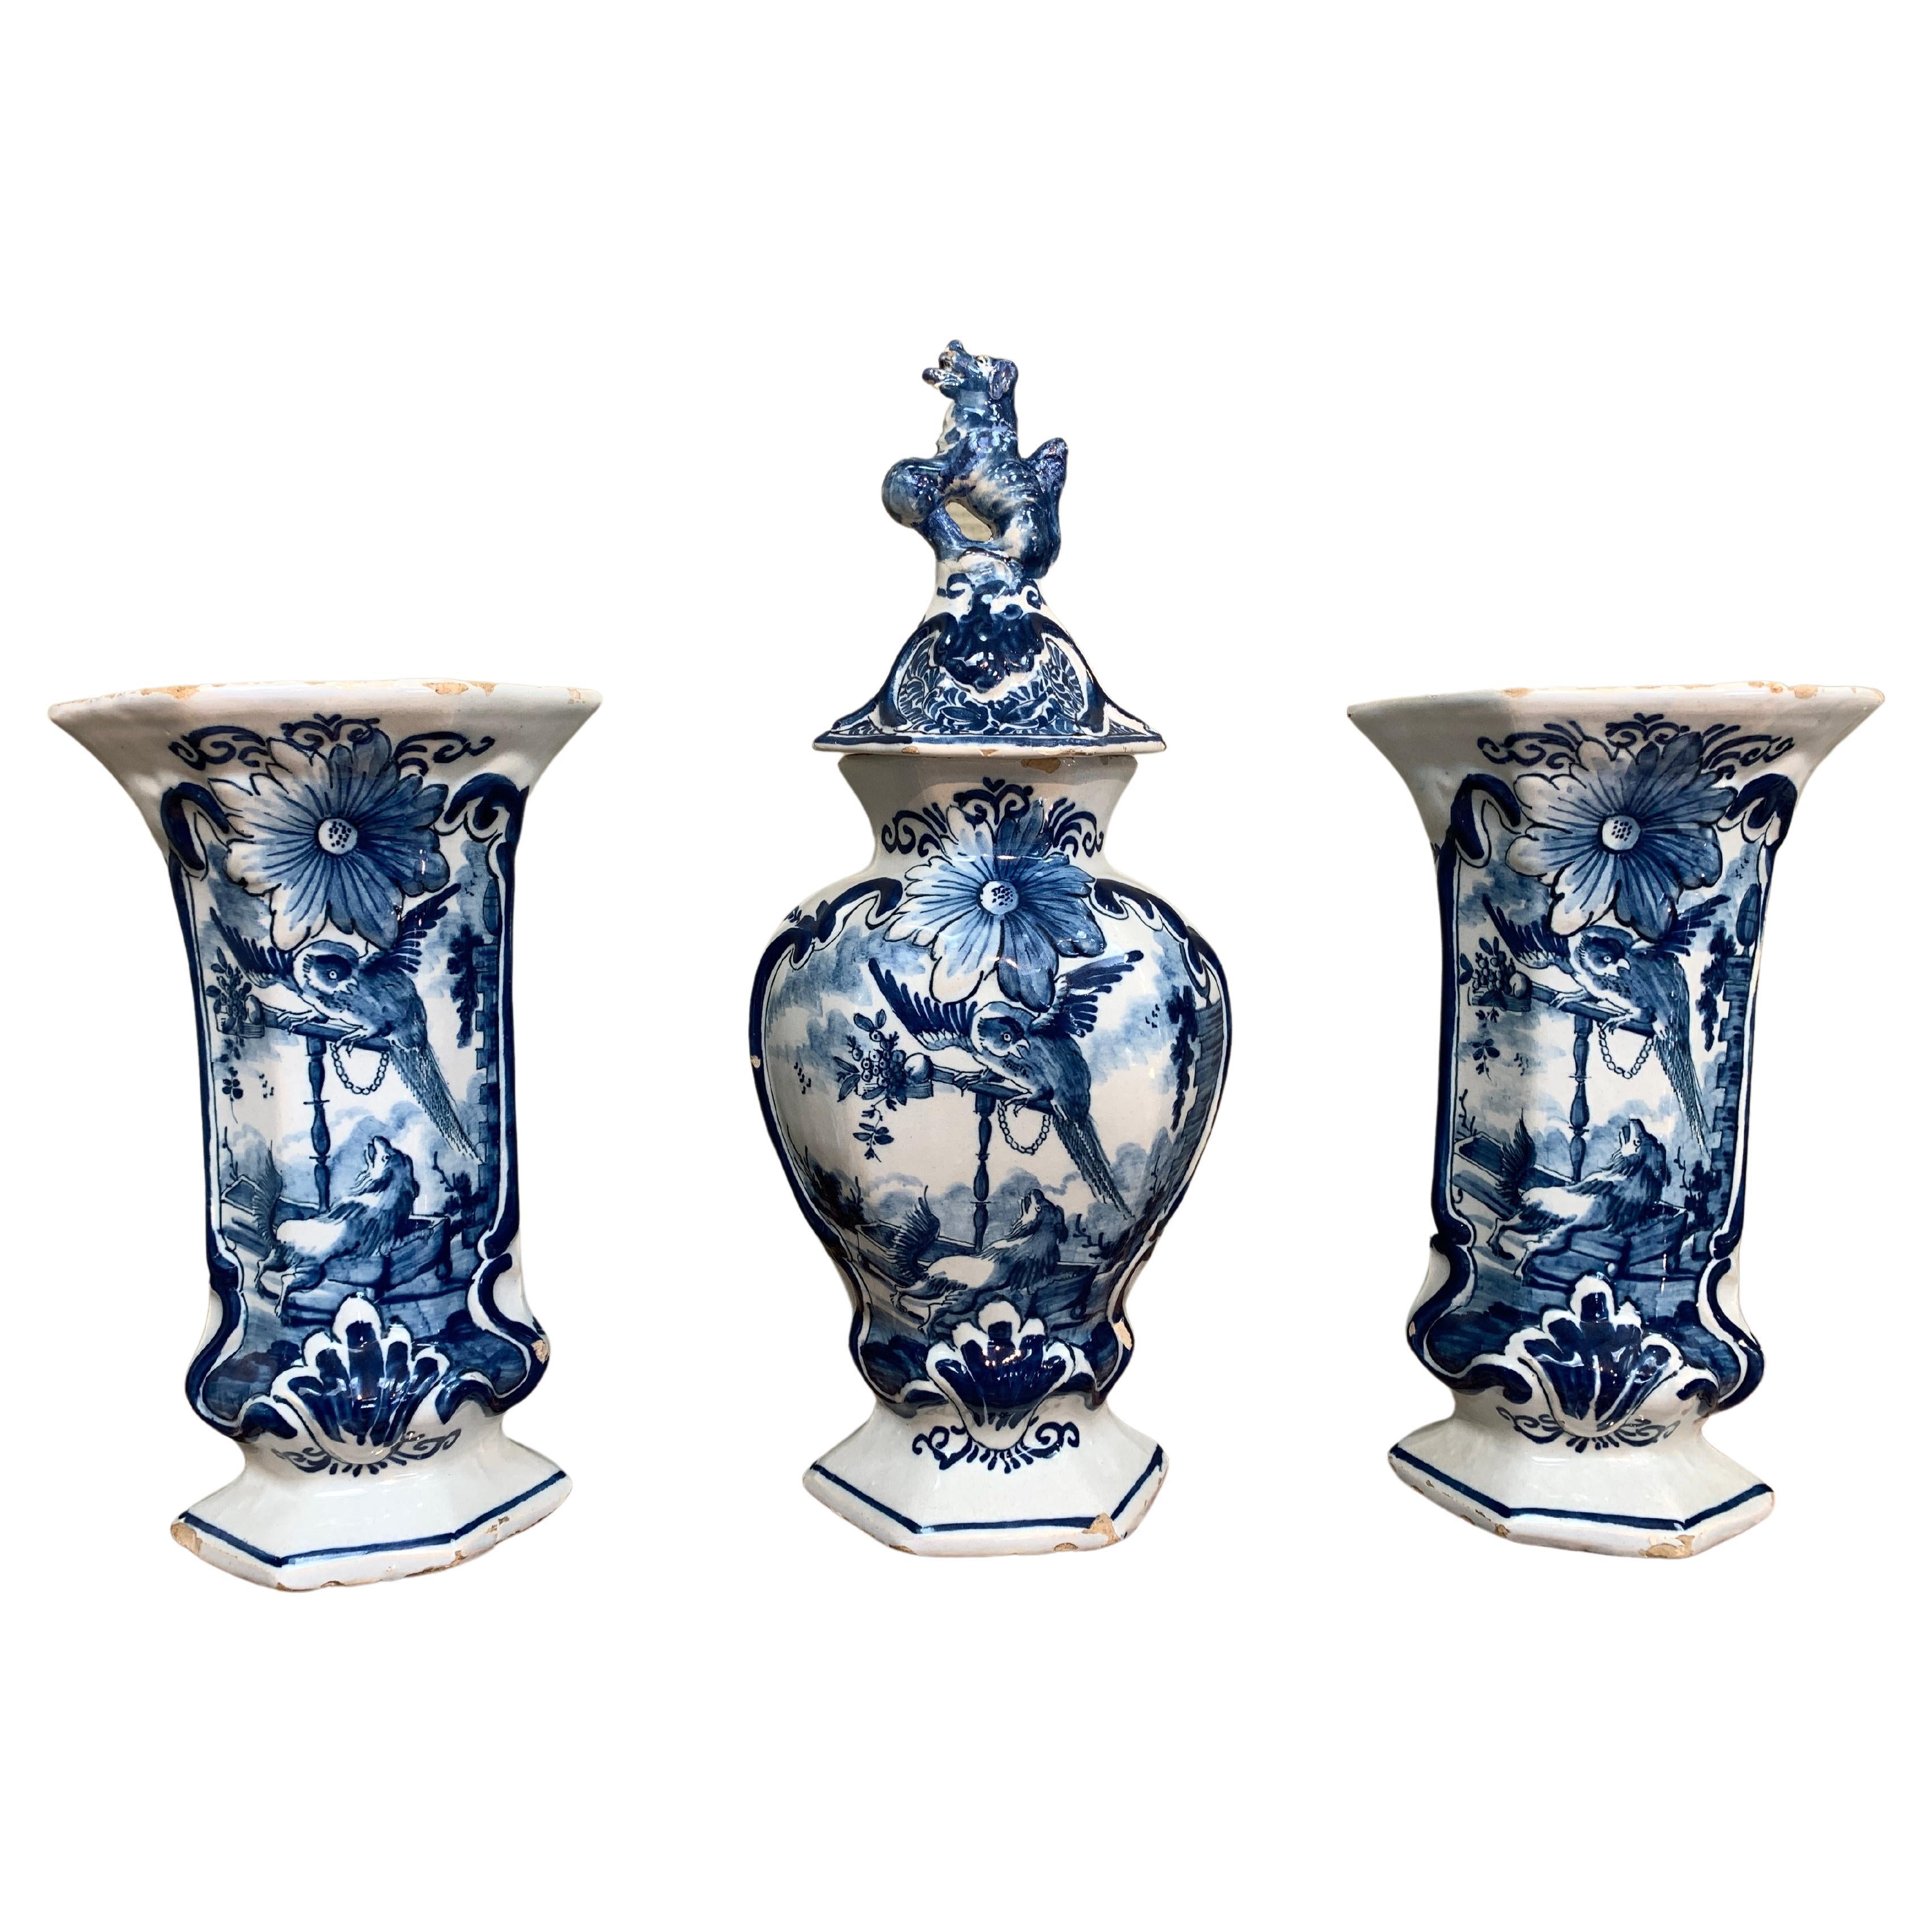 1760s Delft and Faience